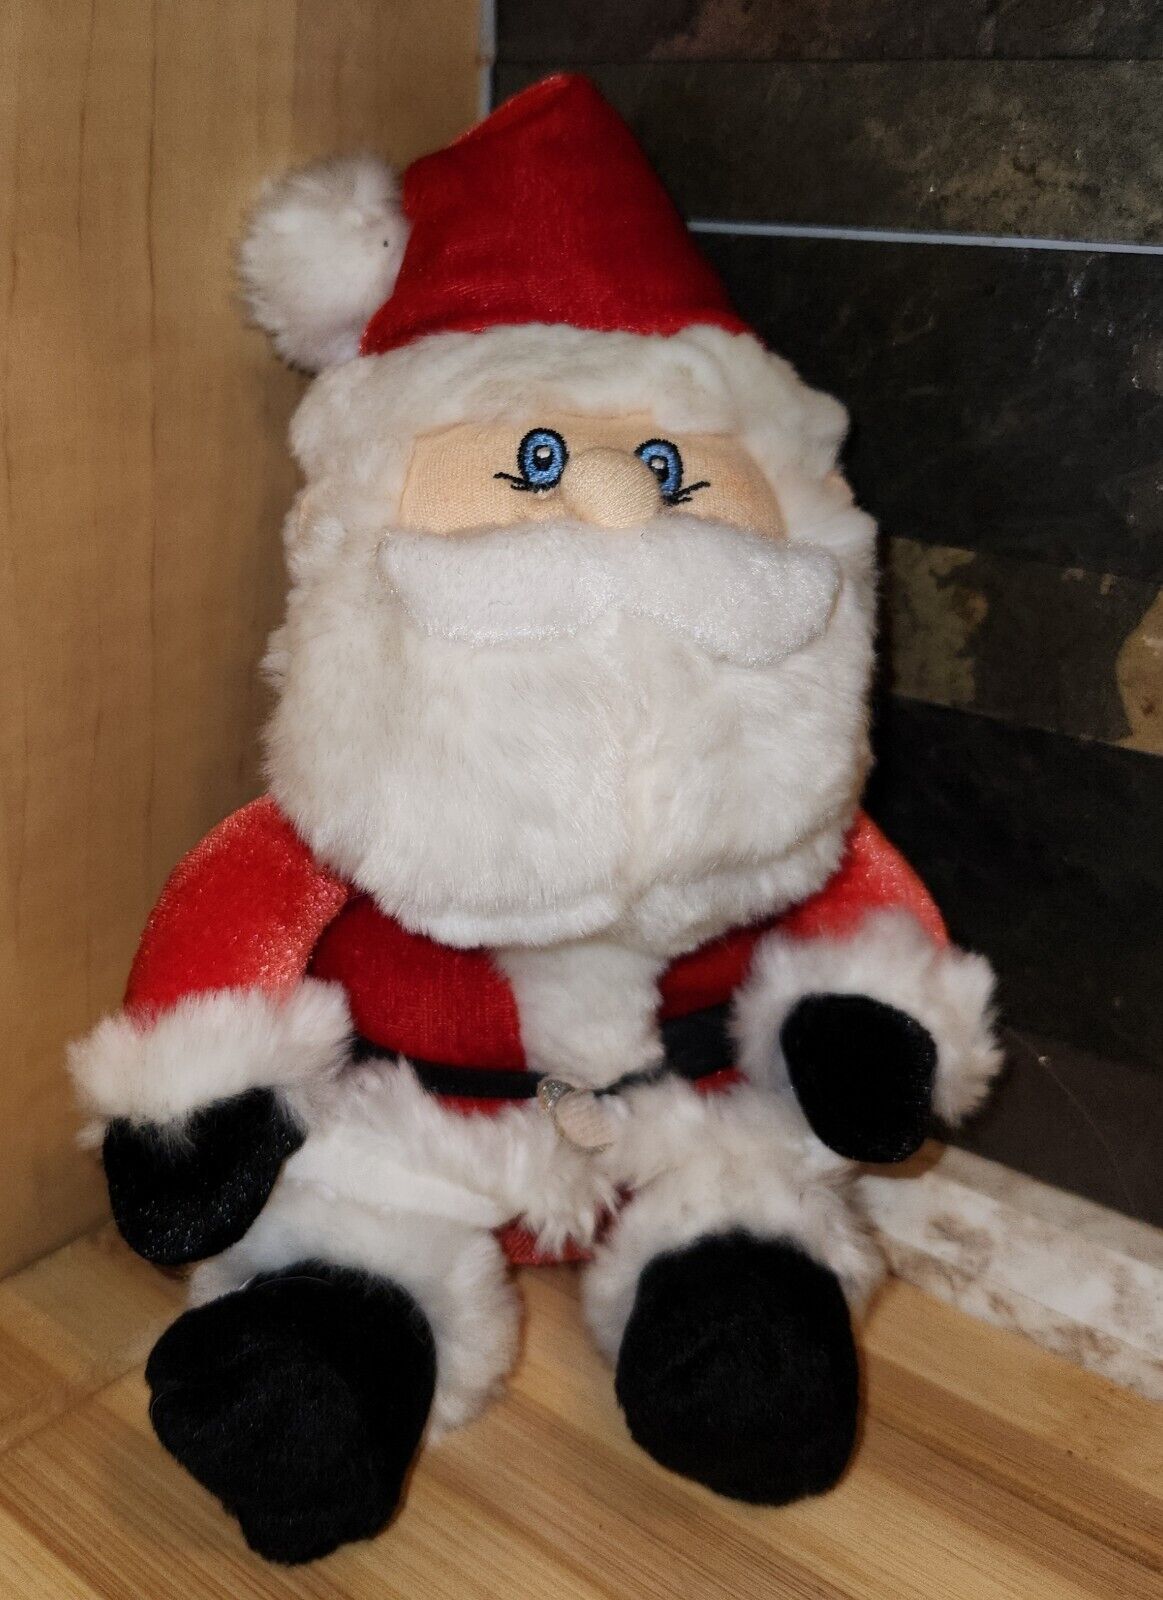 The Windsor Collection Plush Santa Claus Sears Exclusive